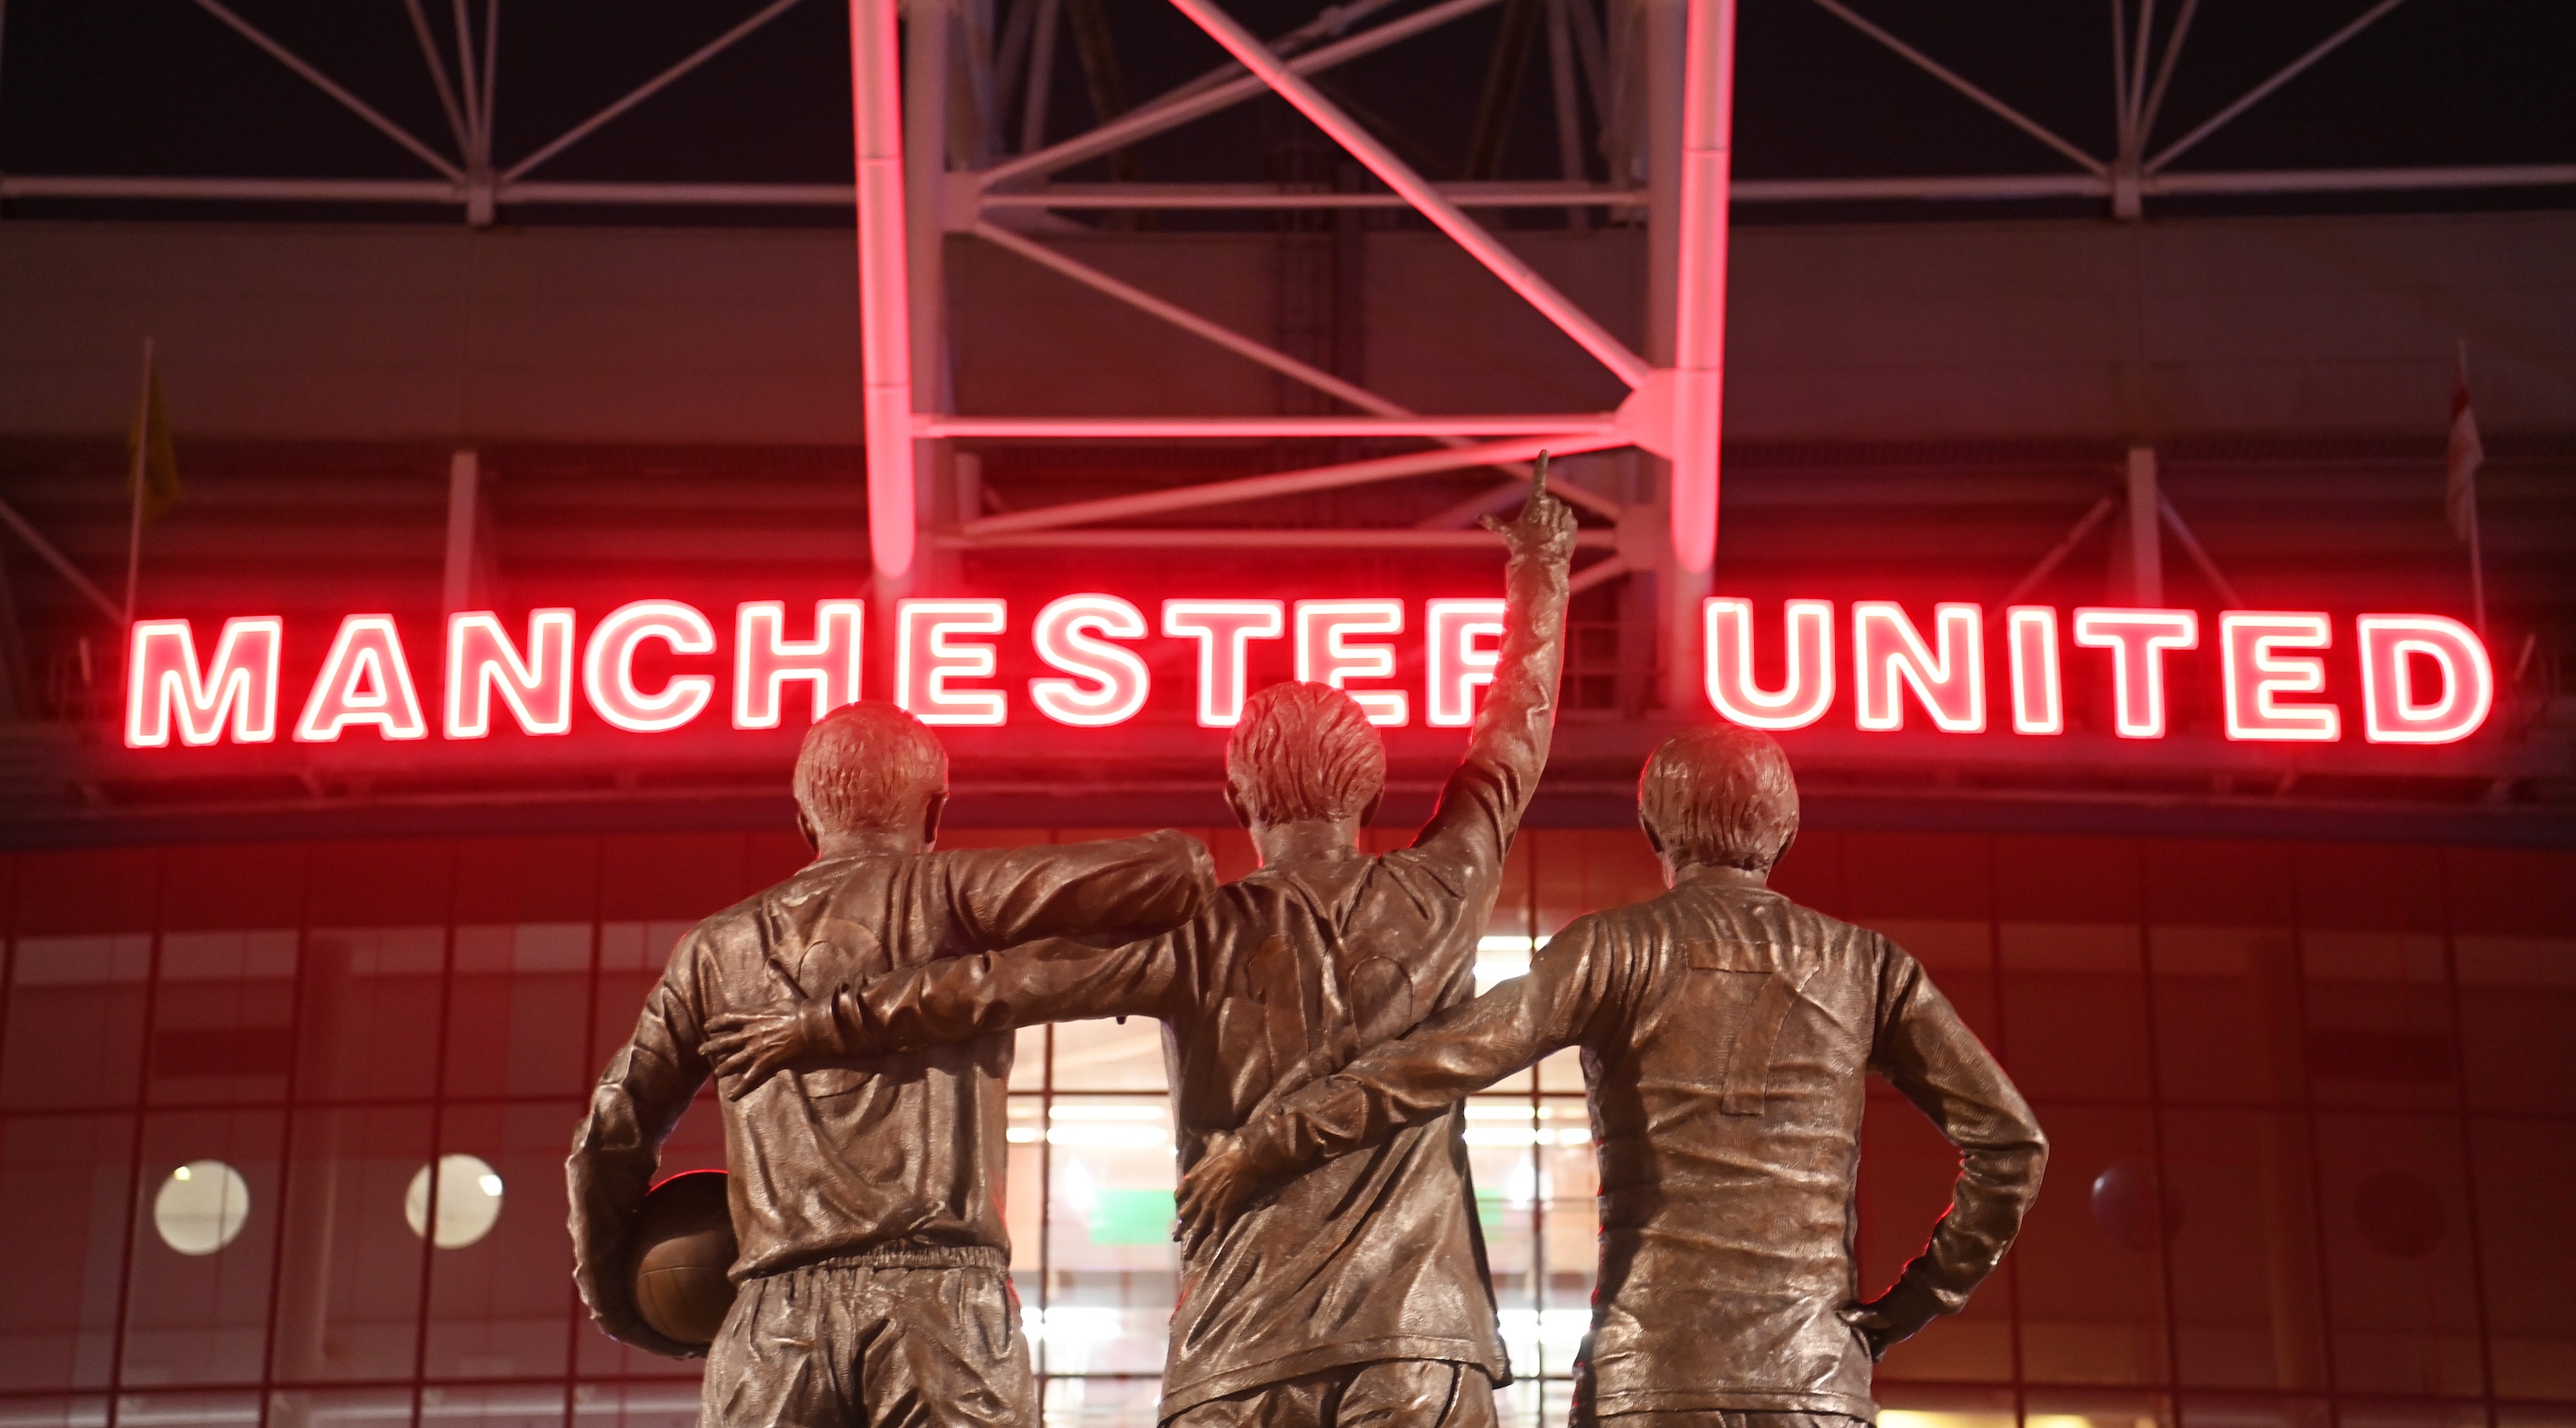 Unveiling expected before Man United’s game against Lens CaughtOffside